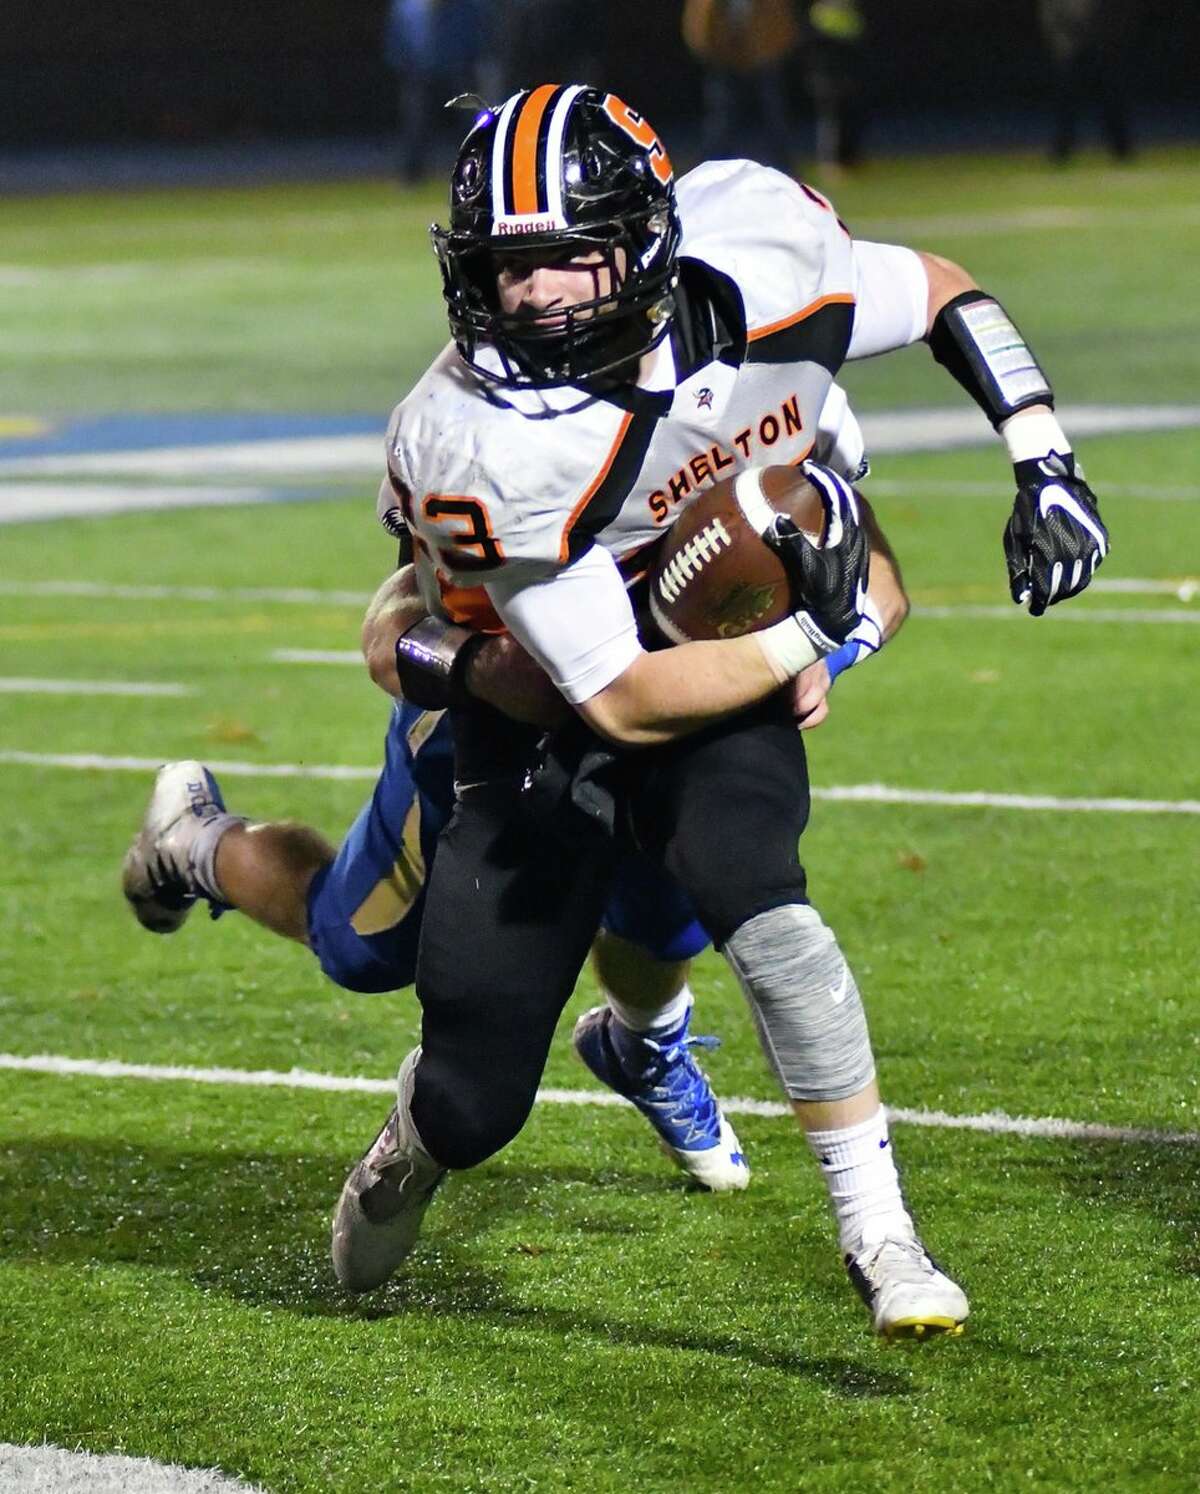 Ronnie Rich of Shelton breaks a tackle in the first half of the Gaels’ 55-21 win over Newtown (Photo via Laxworm.com)